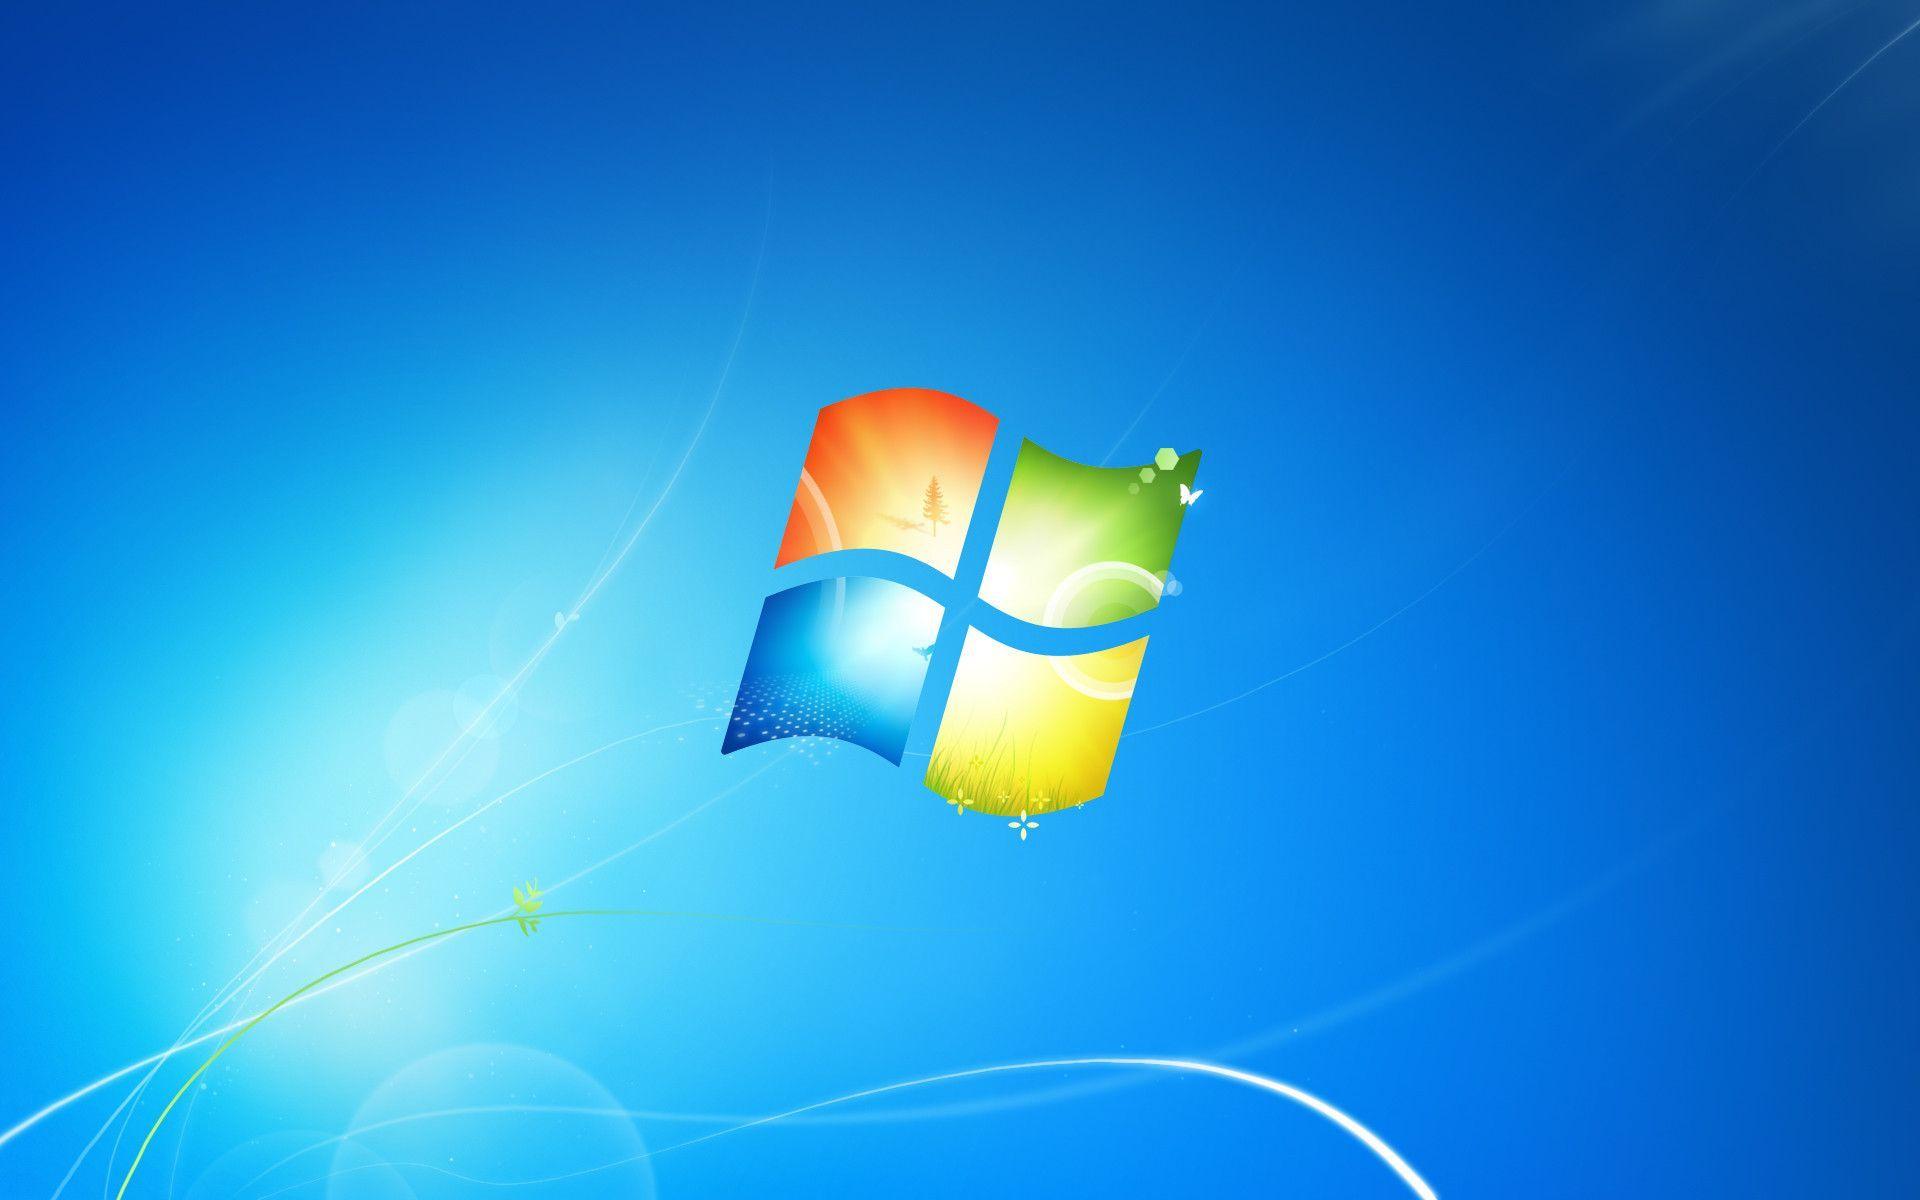 New Windows 7 Patch Is Badware, Disables Graphics Driver Updates